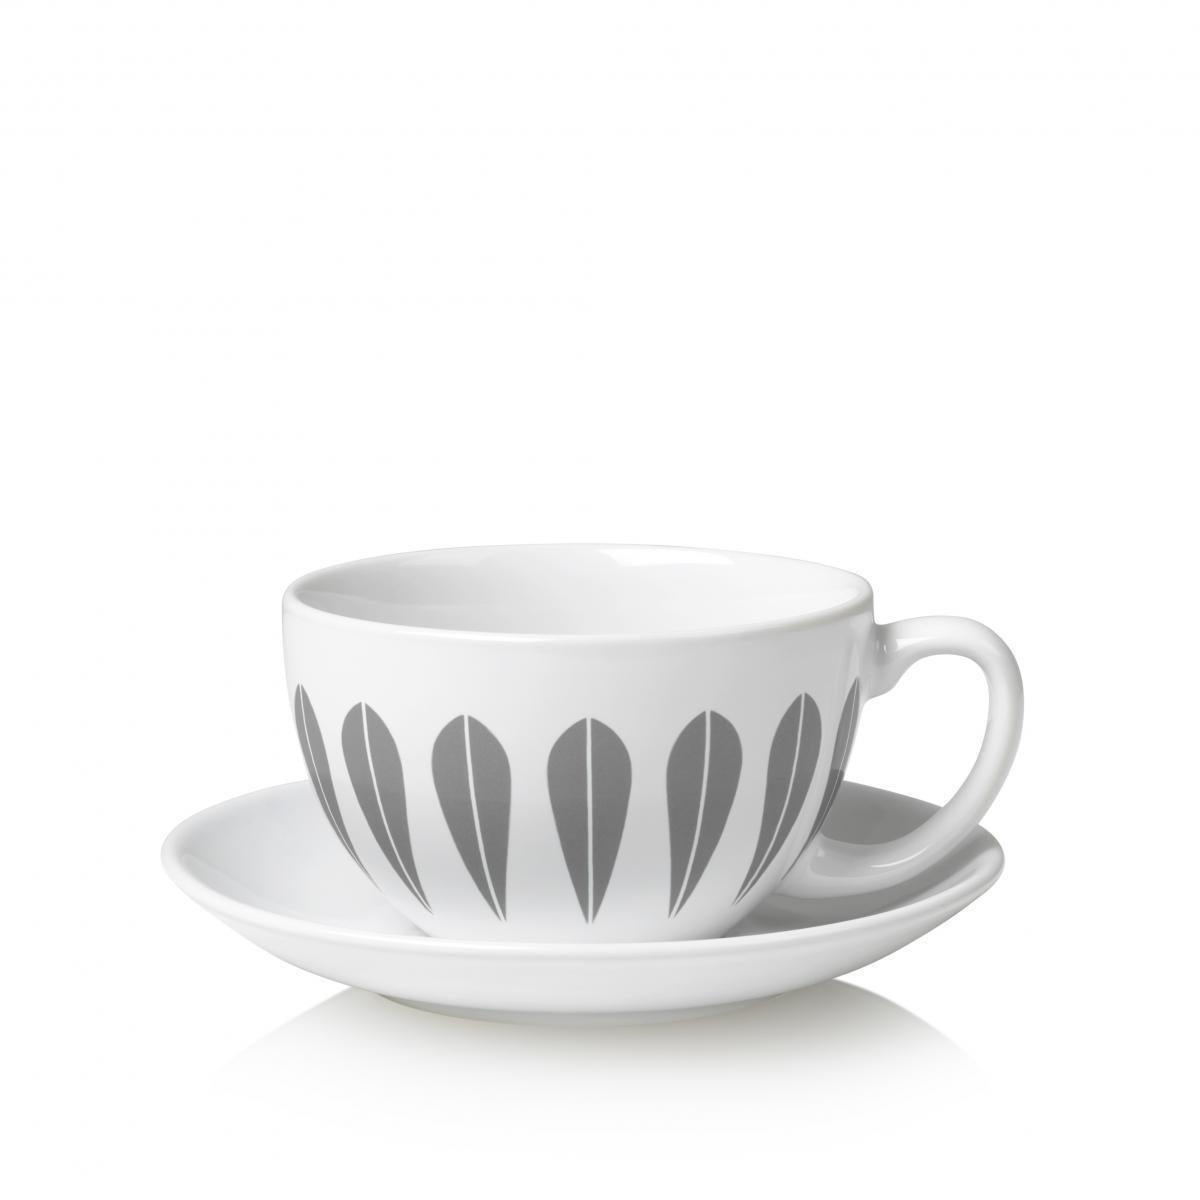 Lucie Kaas Arne Clausen Collection Cups W. Saucer Grey, 10 cm